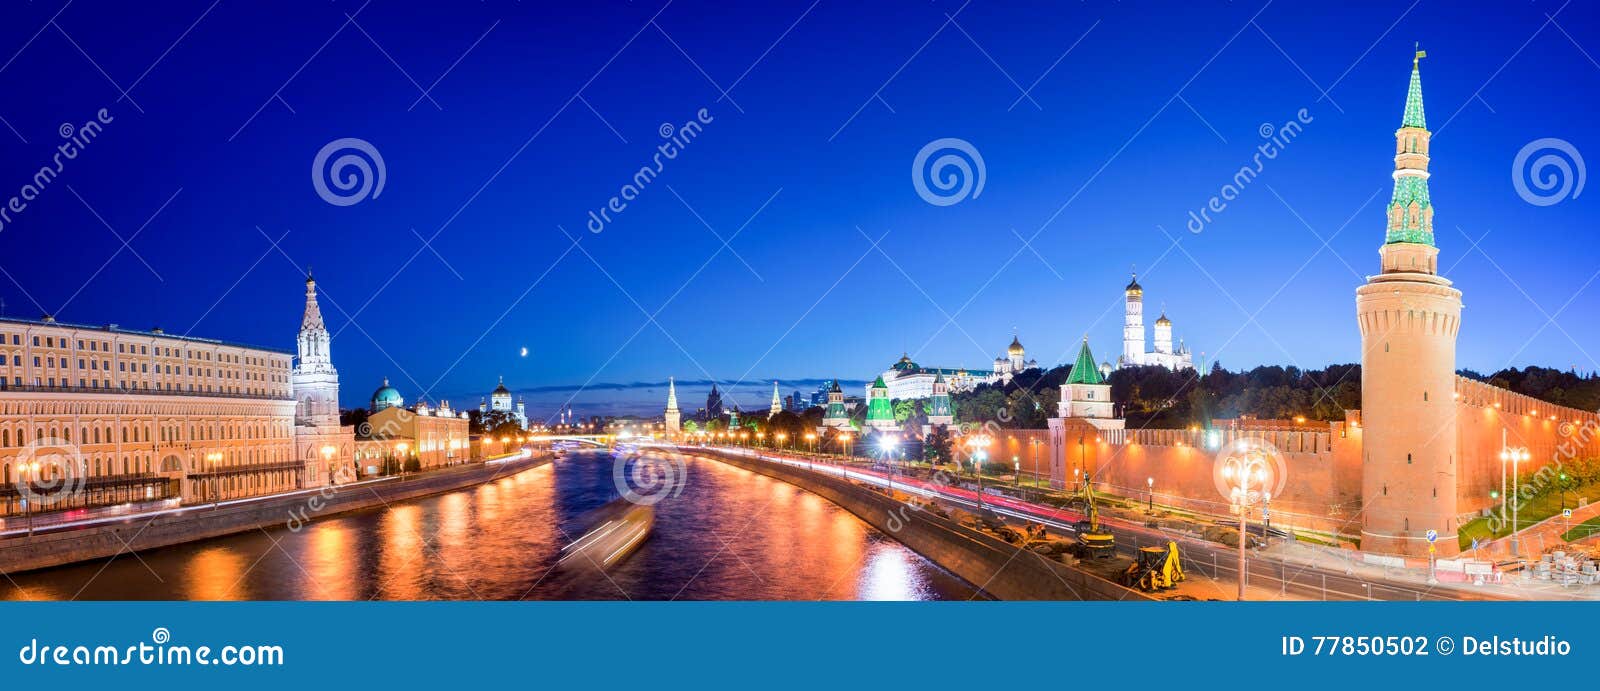 panorama of the moskva river with the kremlin's towers at night, moscow, russia